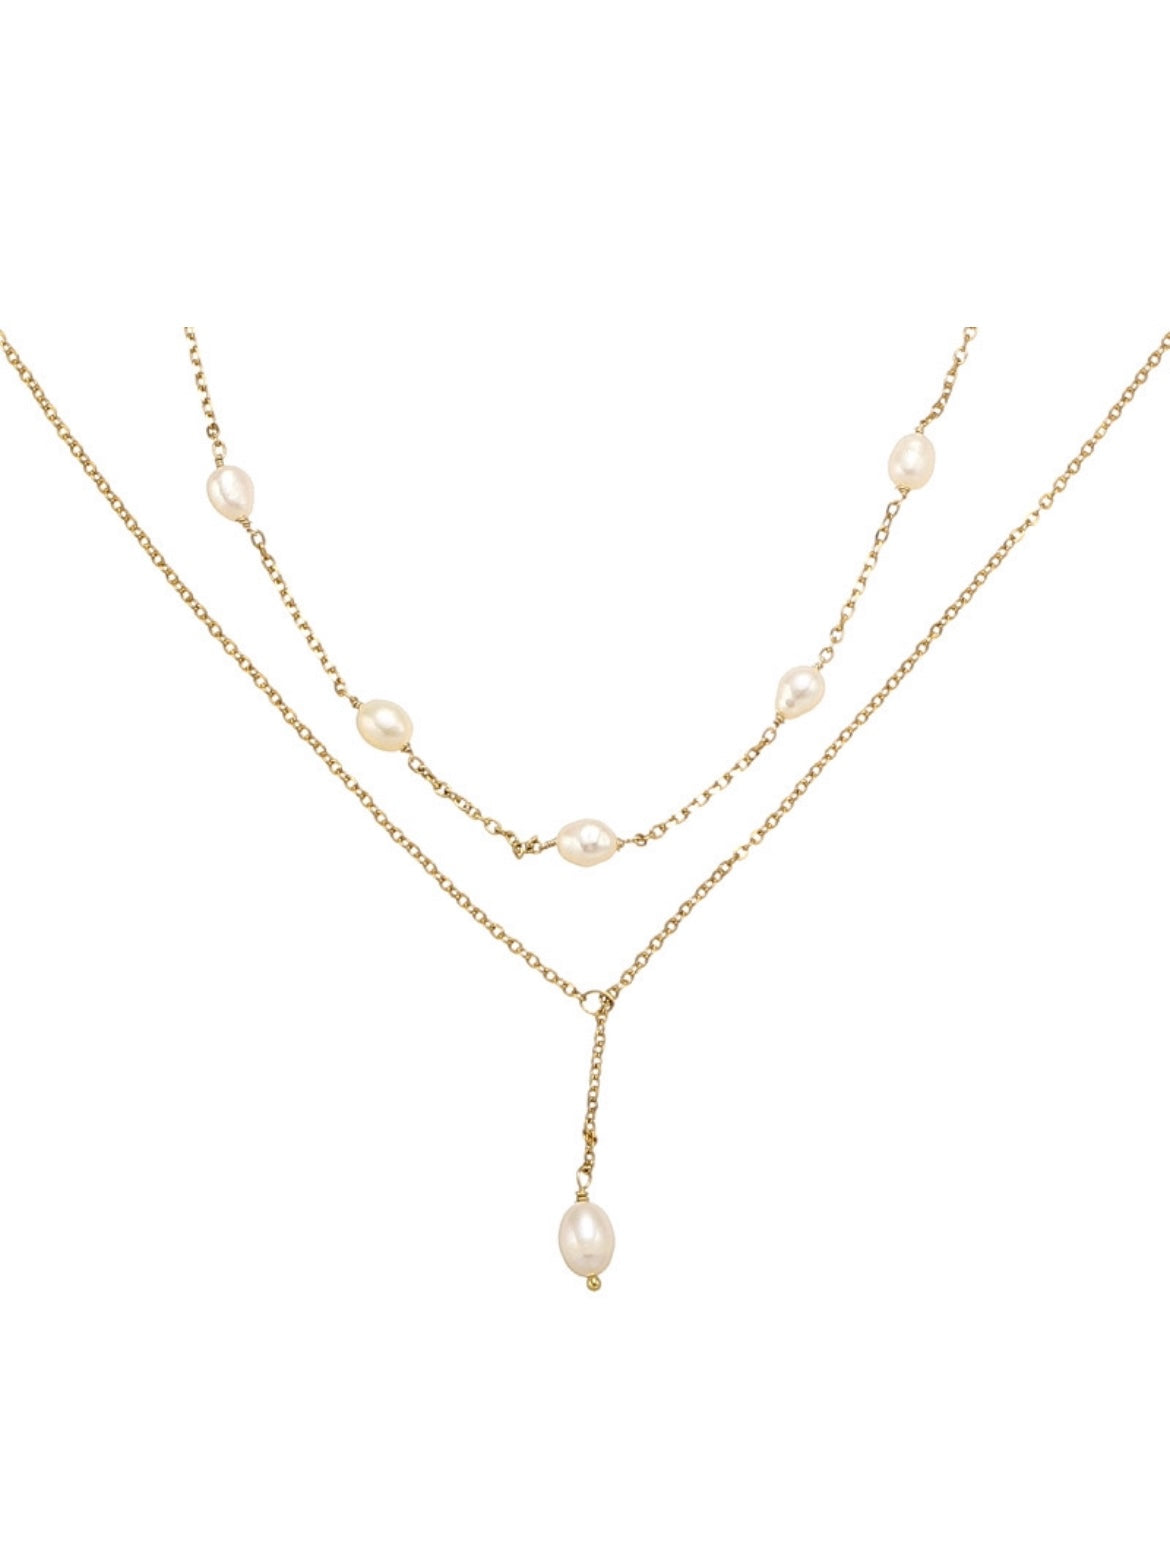 18k gold jewelry | buds fantasy | float pearl necklace set